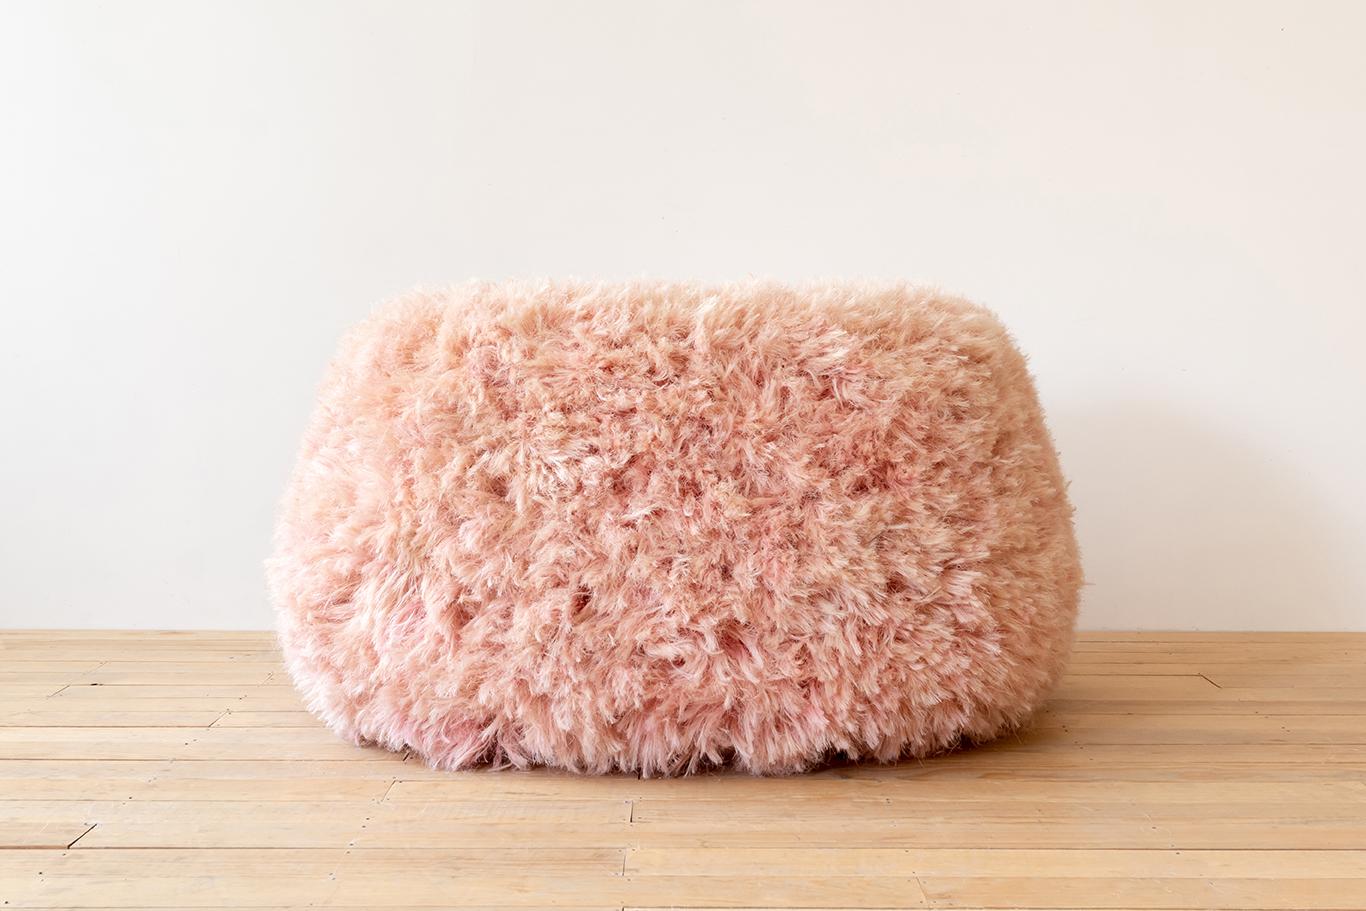 Fernando Laposse [Mexican, b 1988]
Pink Furry Armchair
2022
Dyed agave fibers, upholstered linen, plywood
Edition 1 of 8, 4AP